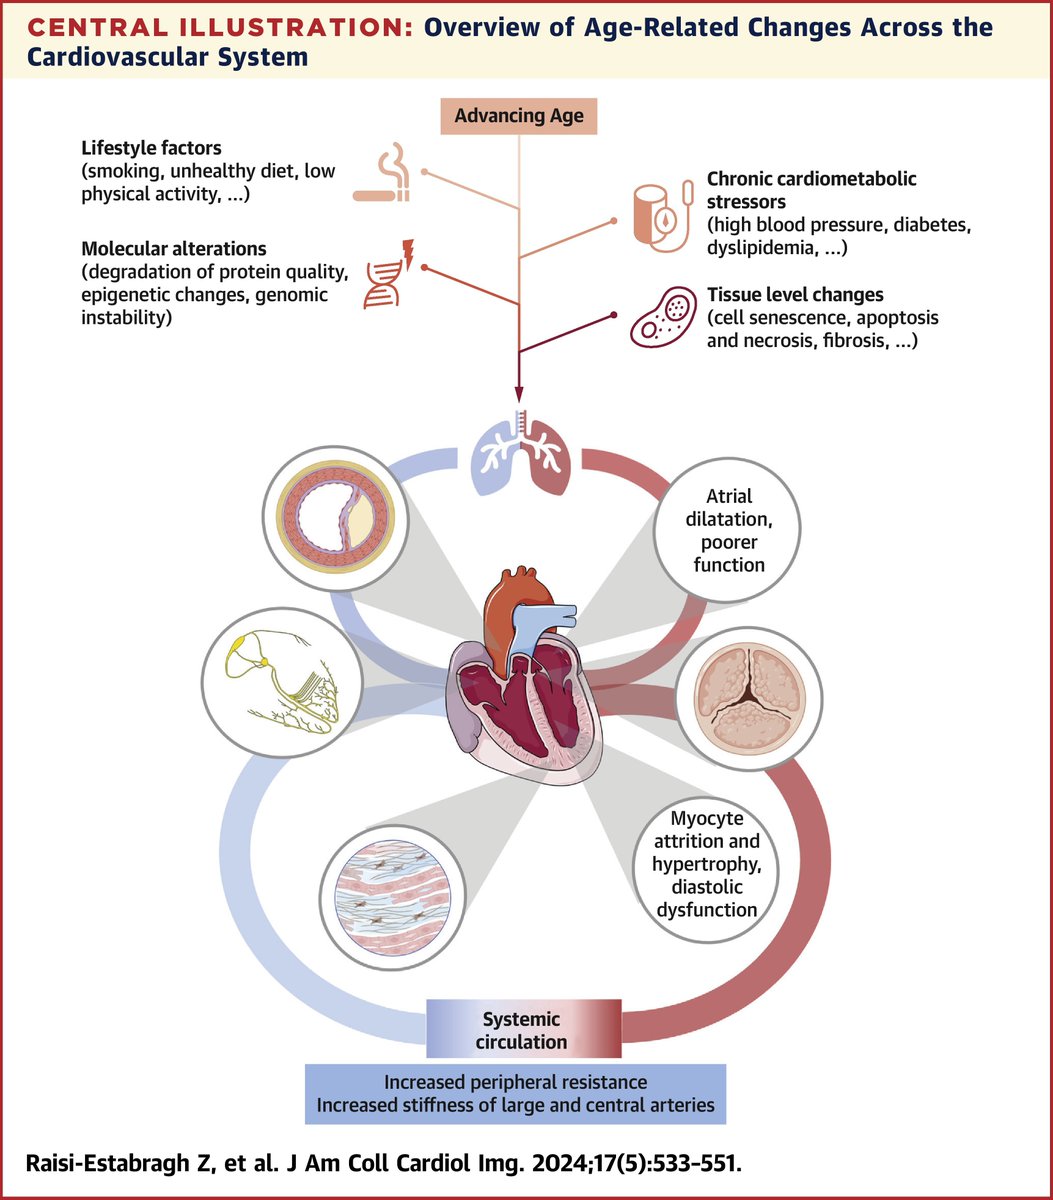 Noninvasive techniques for tracking biological aging of the cardiovascular system: JACC Family Series jacc.org/doi/10.1016/j.… #ageing #prevention #medtwitter via @JACCJournals